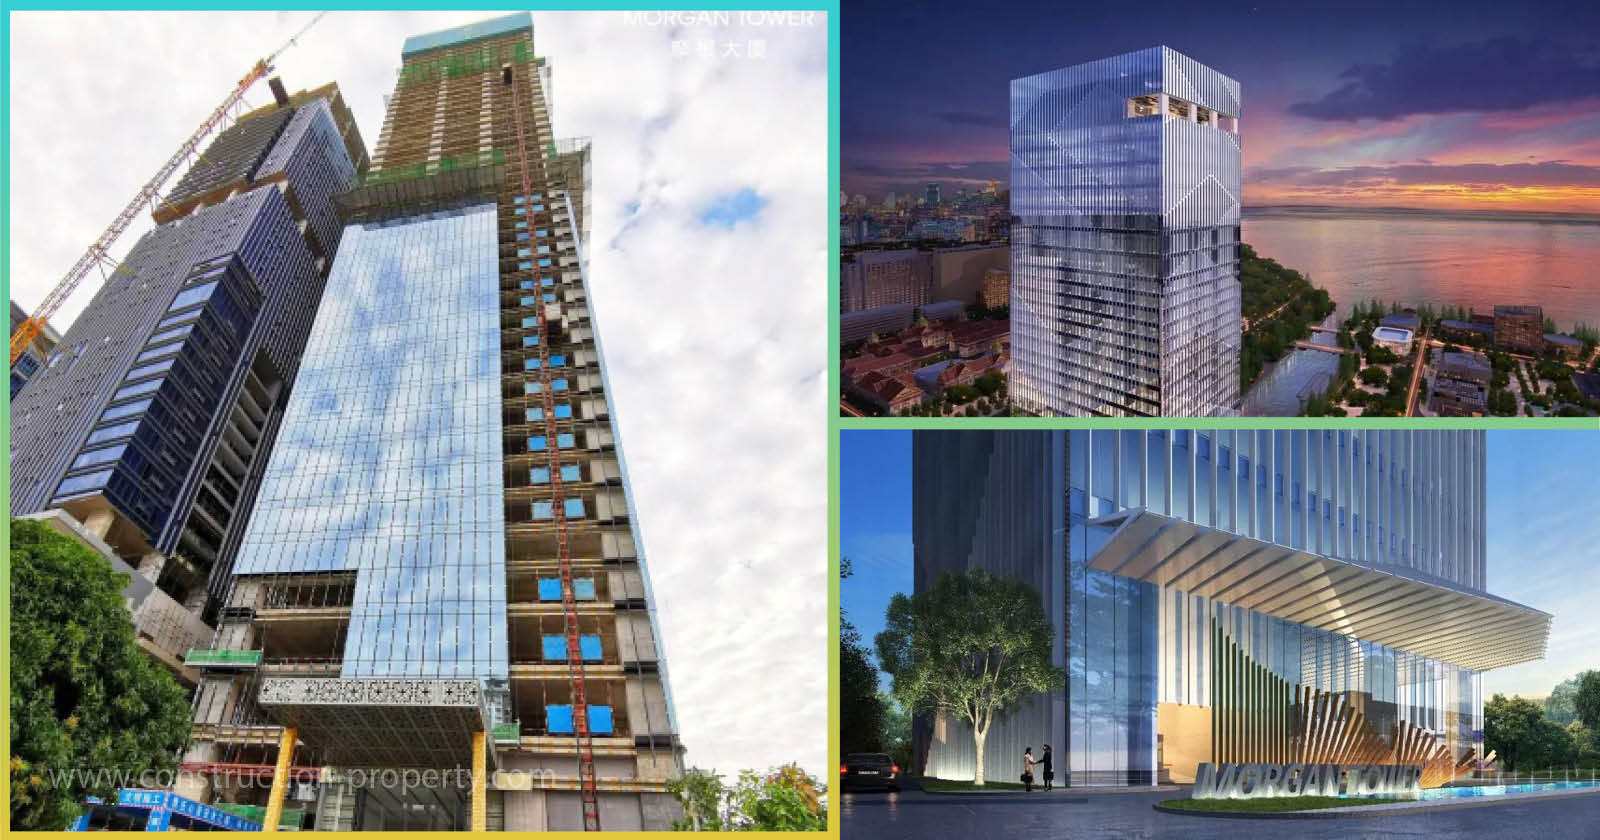 Construction of 46-storey Morgan Tower Complete